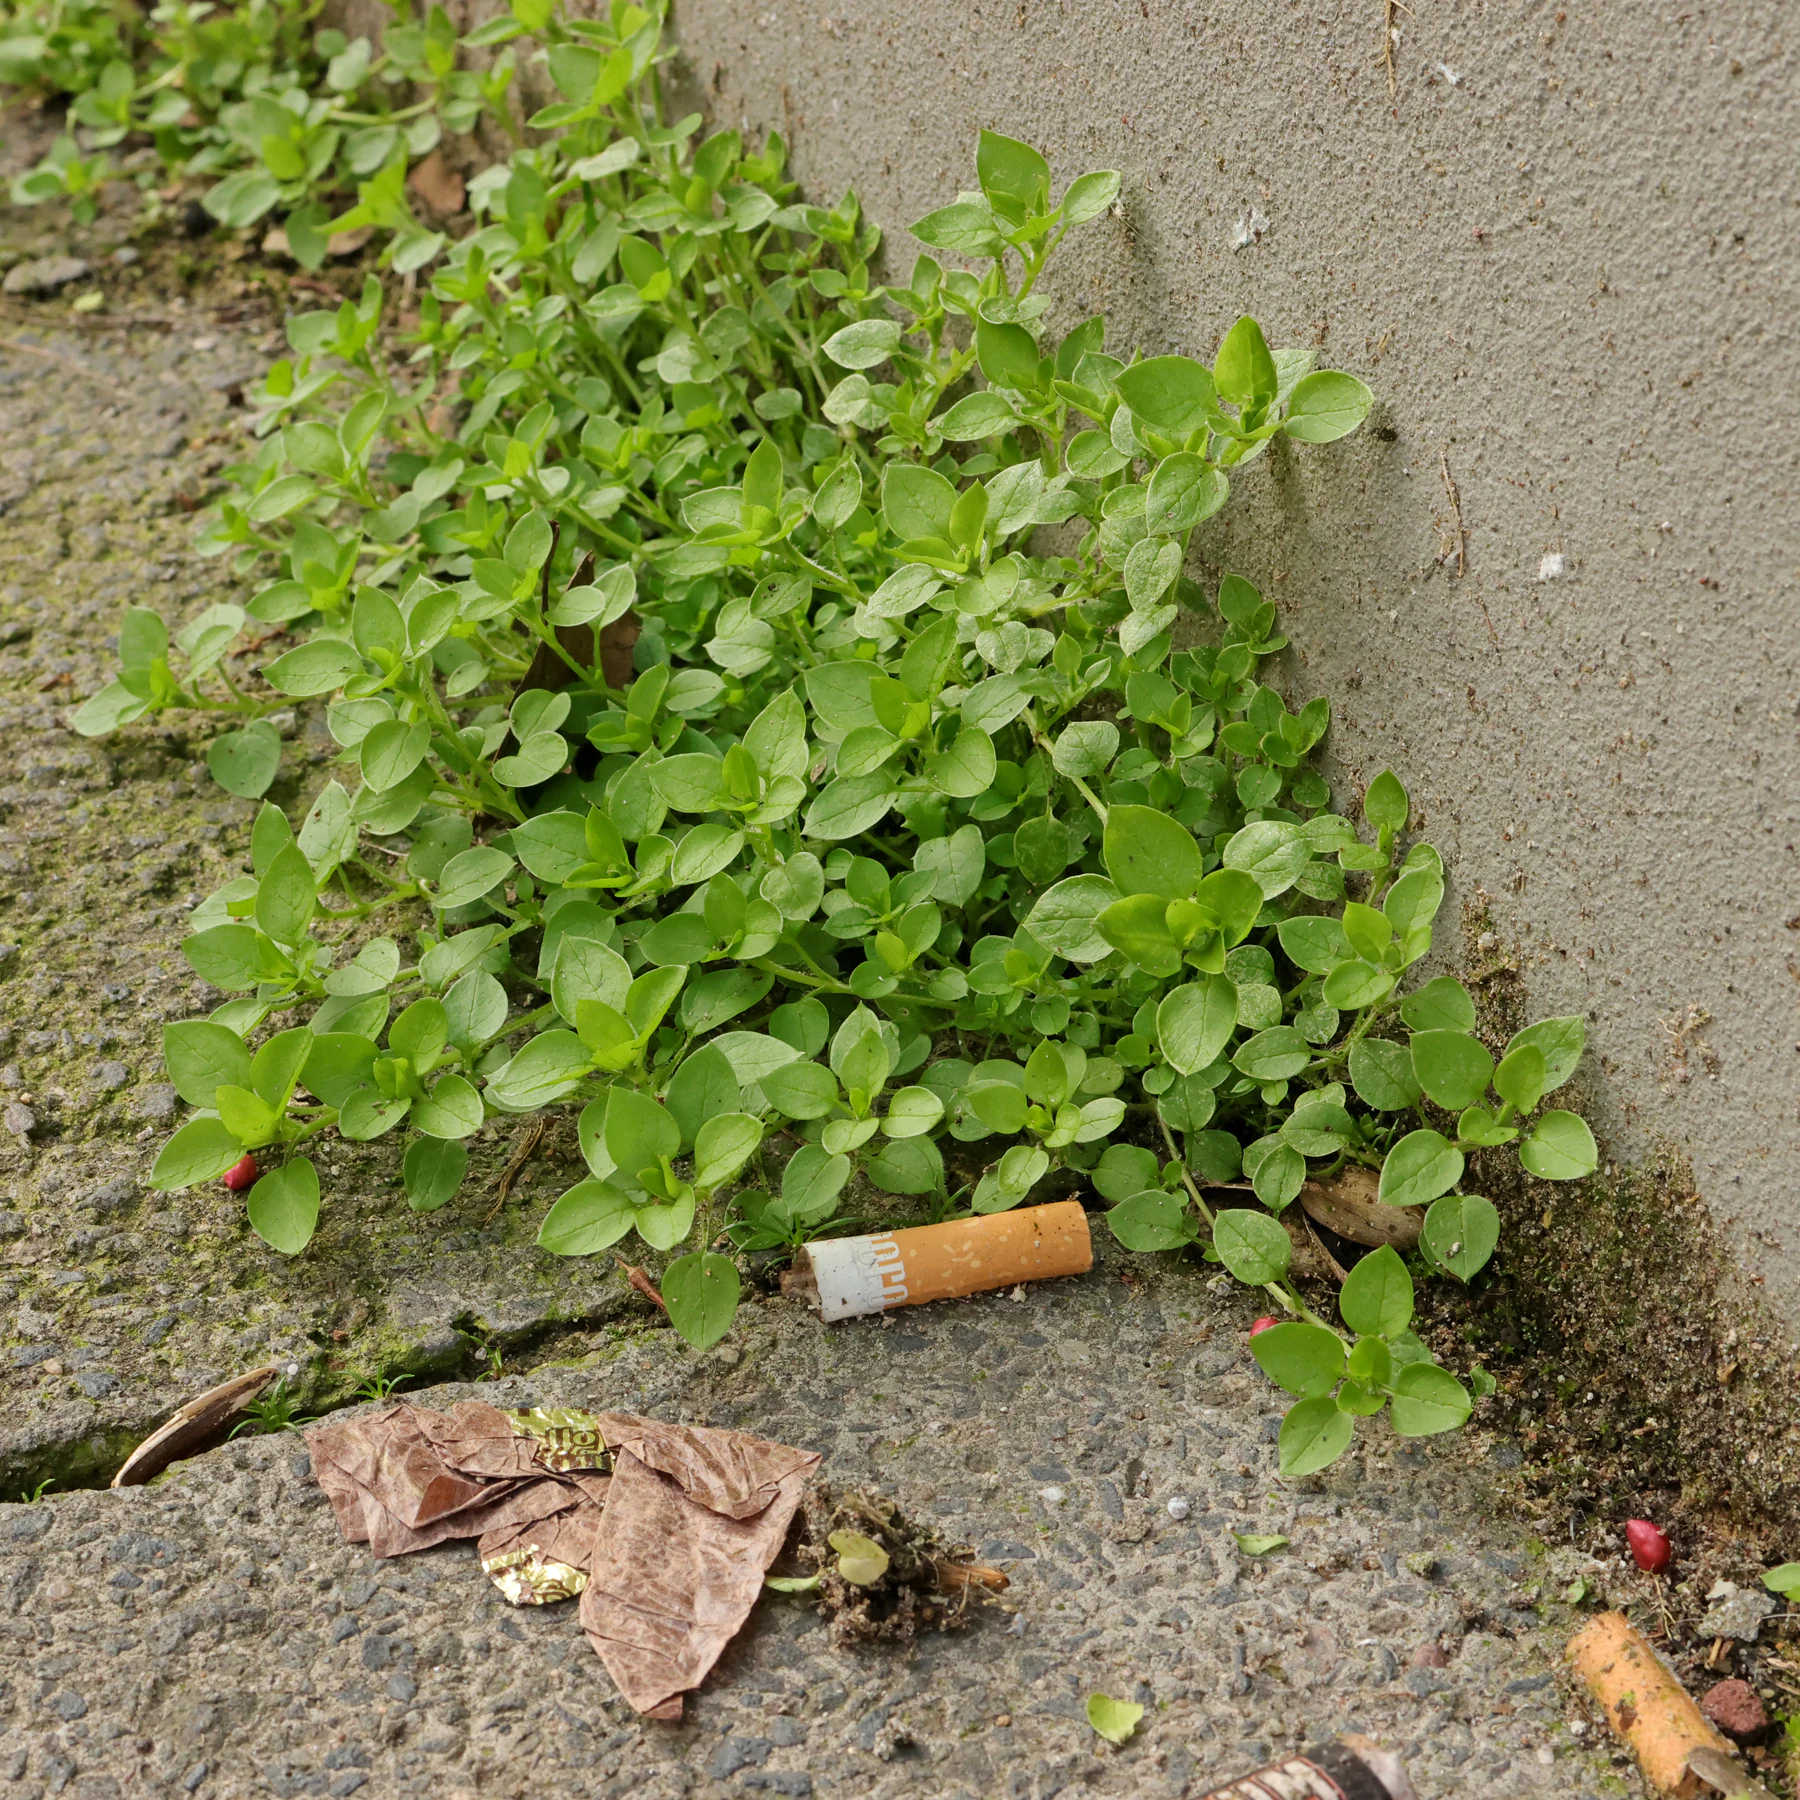 Chickweed by the wayside